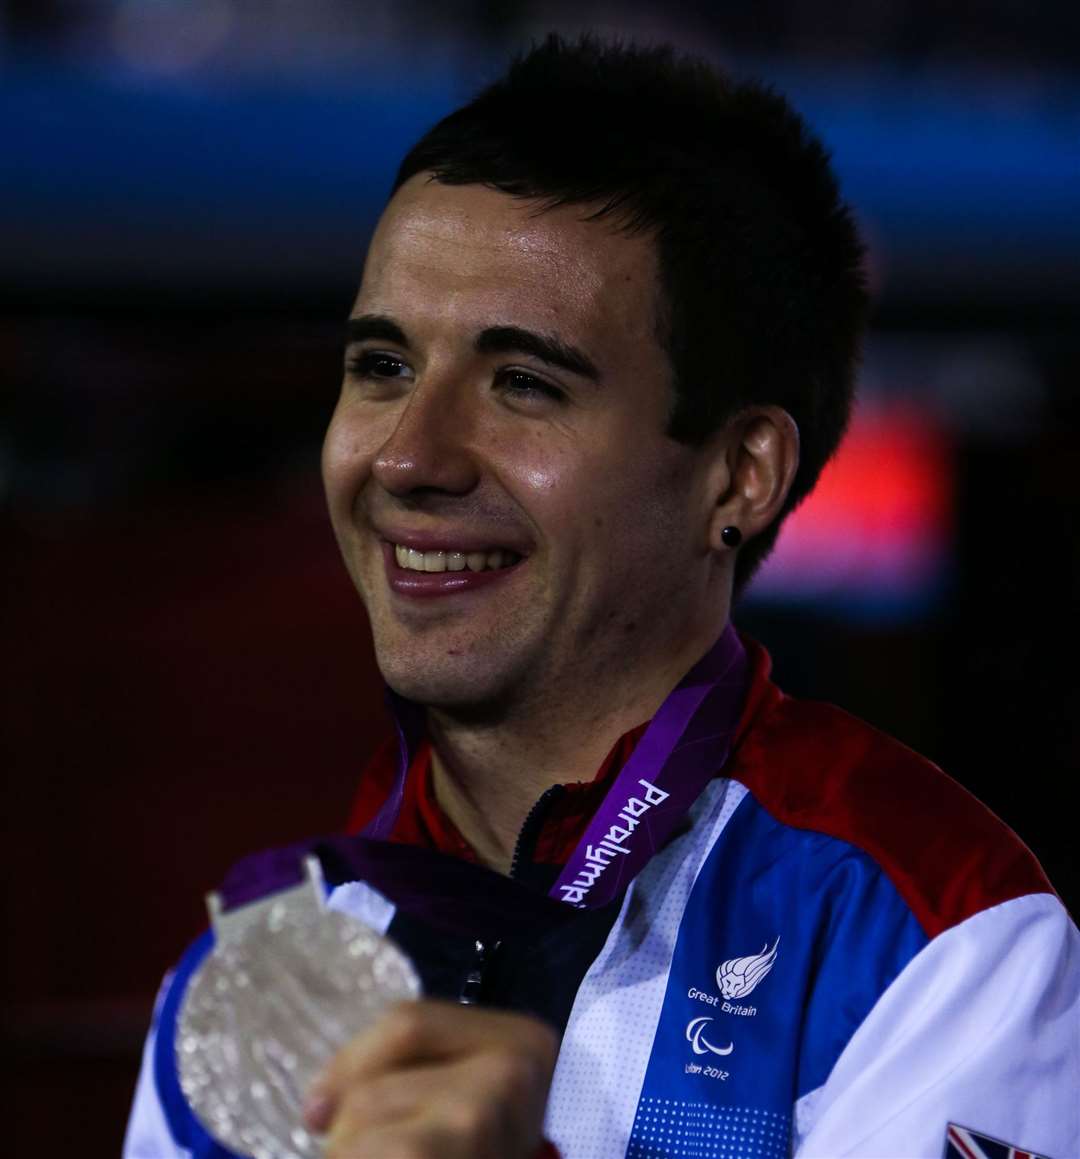 Will Bayley celebrates with his silver medal from the men's single's class 7 gold medal match at the Excel Arena. Picture: John Walton/PA